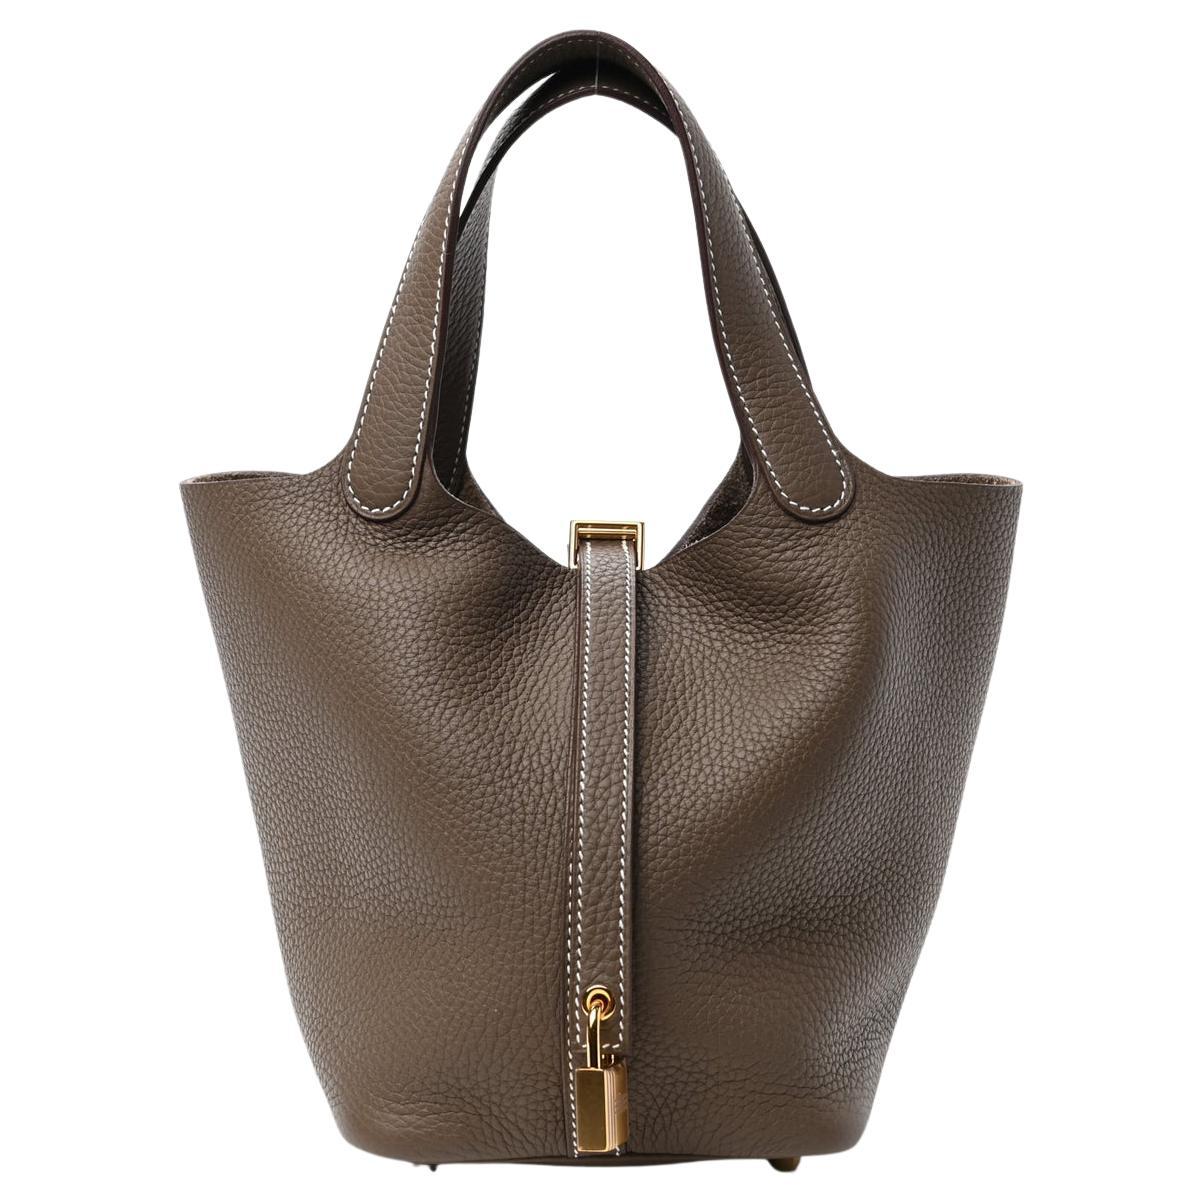 HERMES NEW Picotin 18 Taupe Leather Gold Small Top Handle Bucket Tote Bag